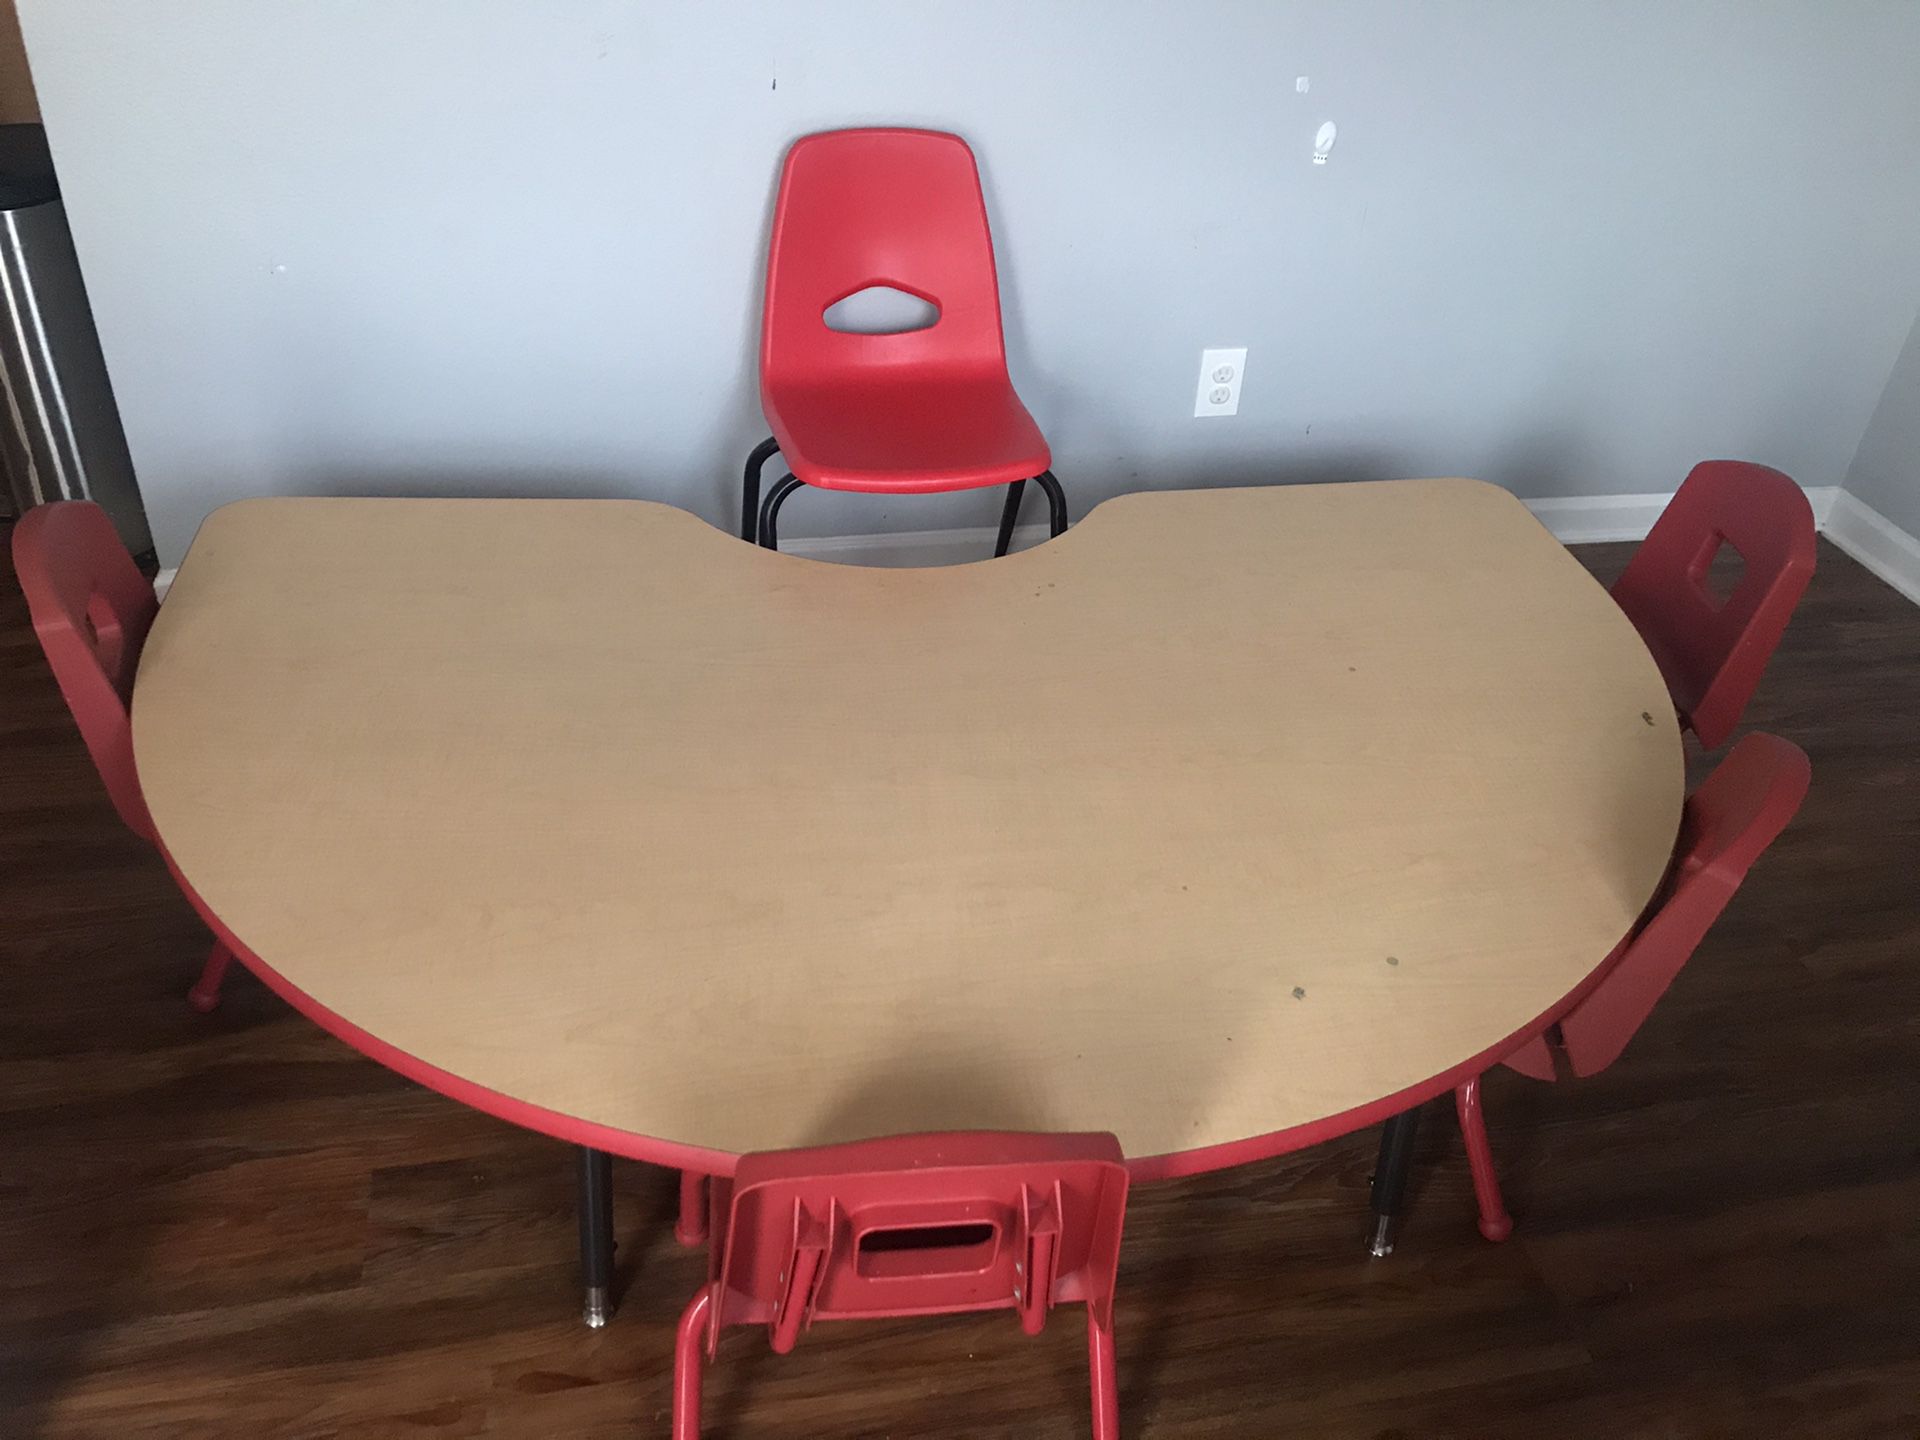 Large kids table w/8 chairs and teacher chair